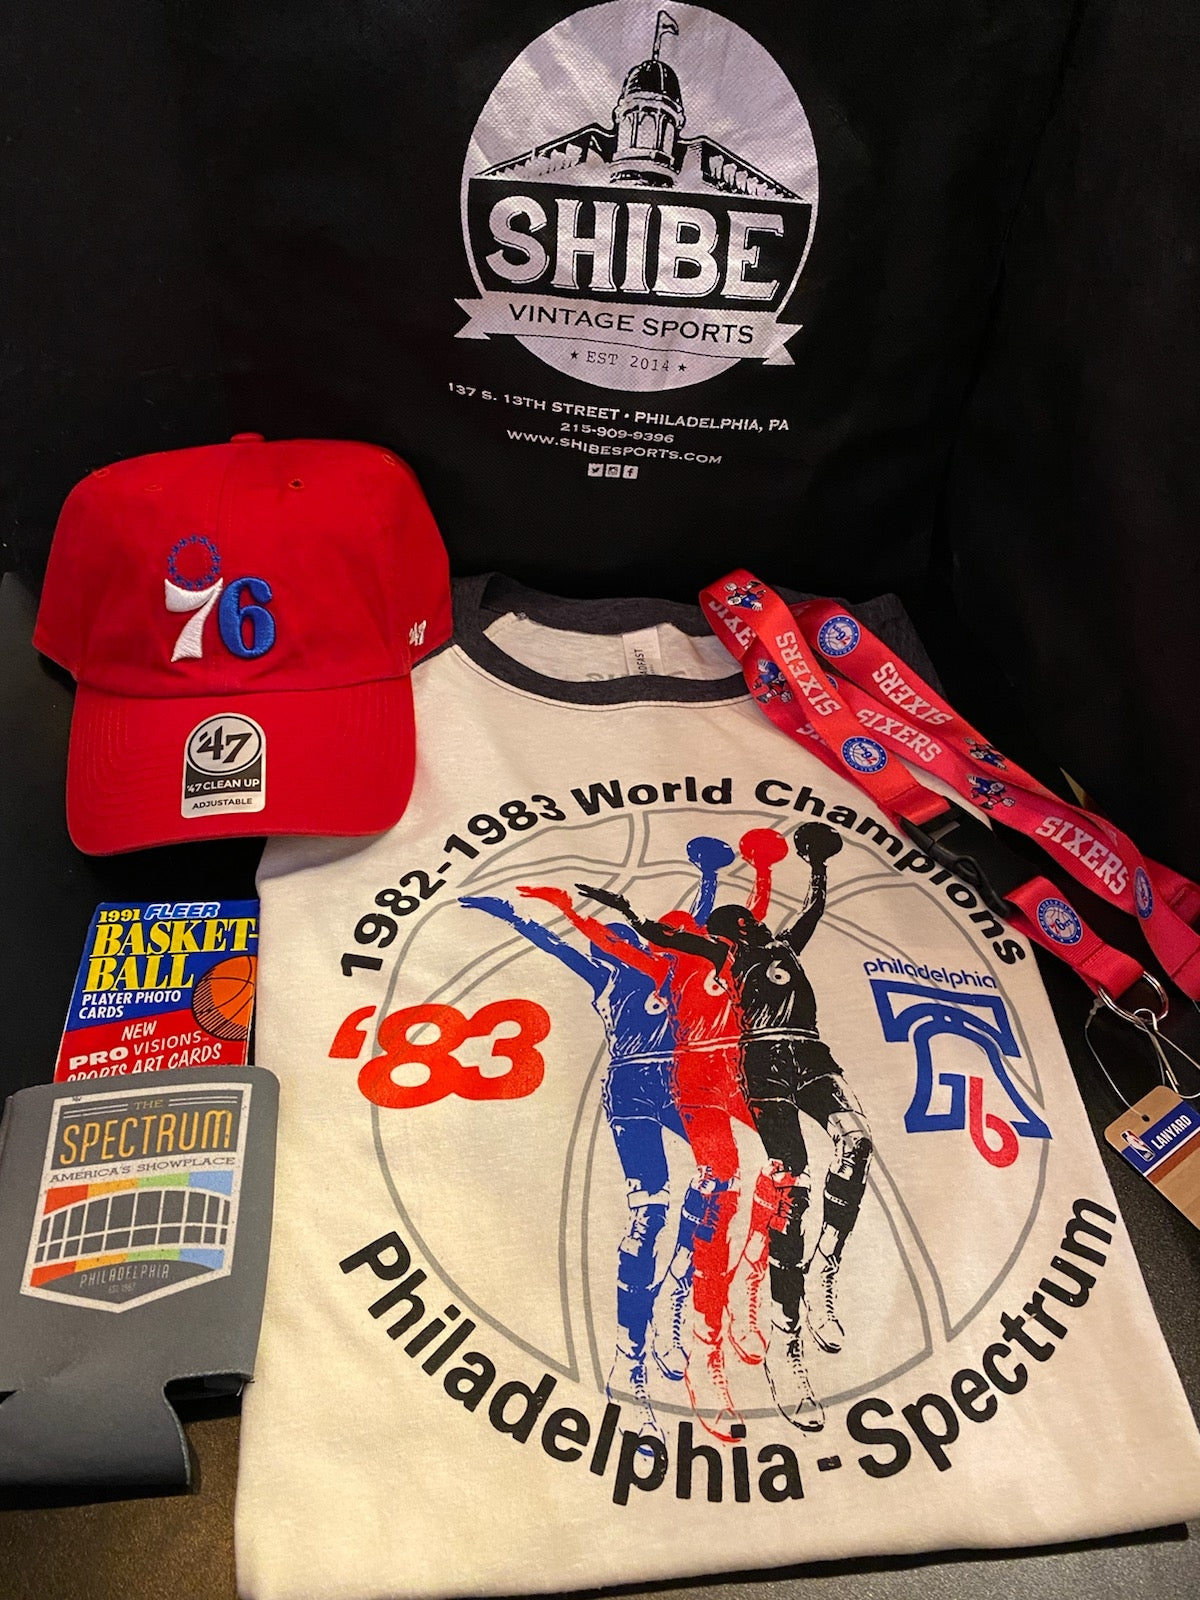 Philly Sports Gear for Kids - Shibe Vintage Sports